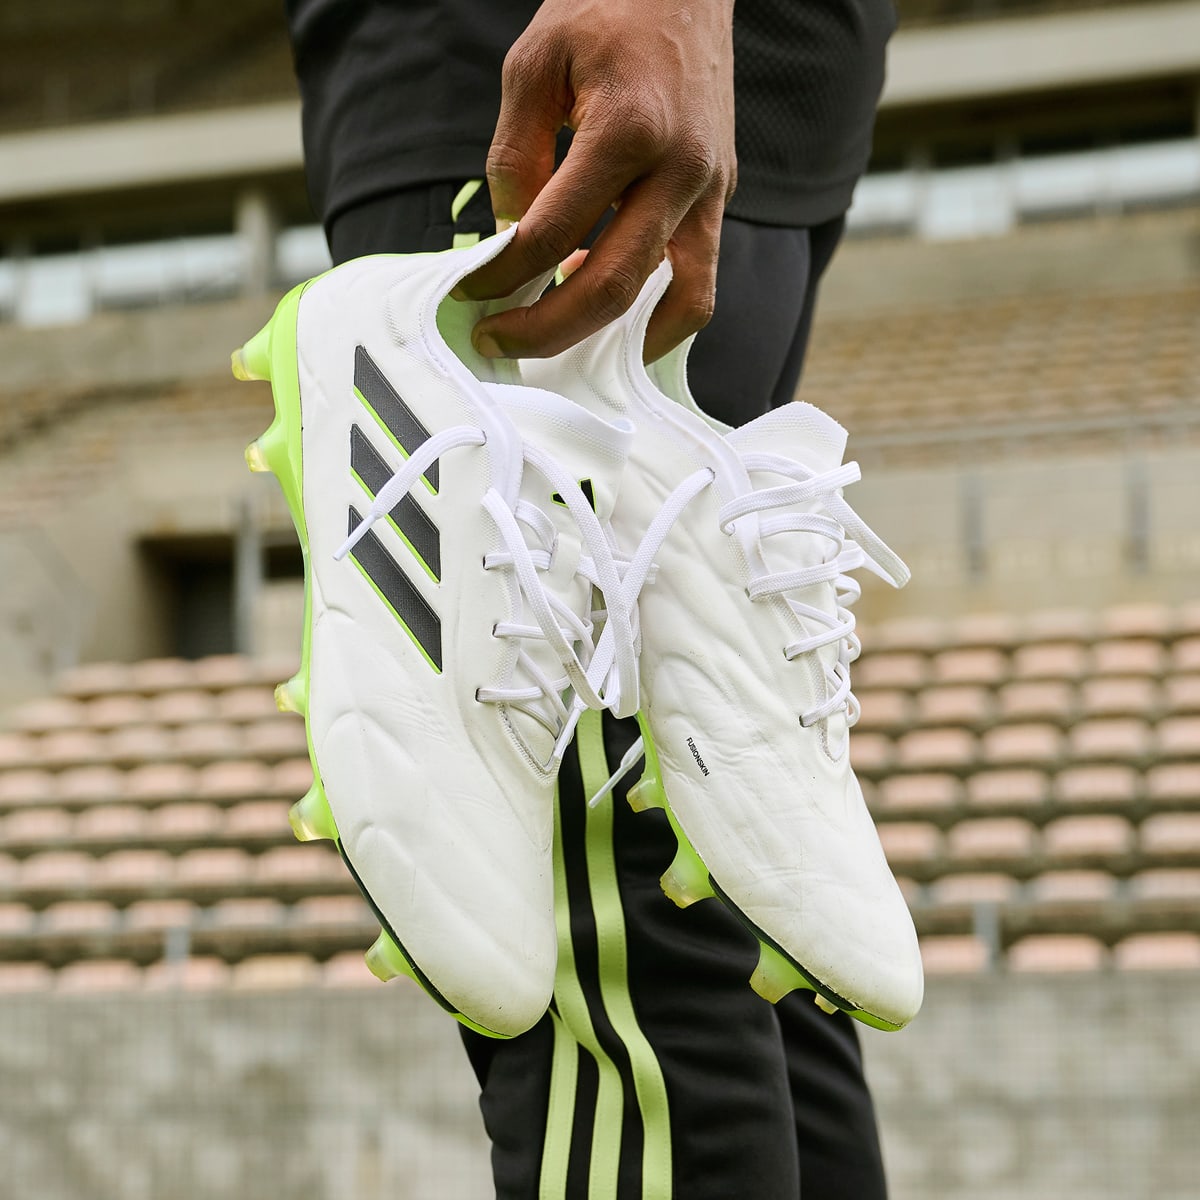 Adidas Copa Pure II.1 Firm Ground Boots. 9